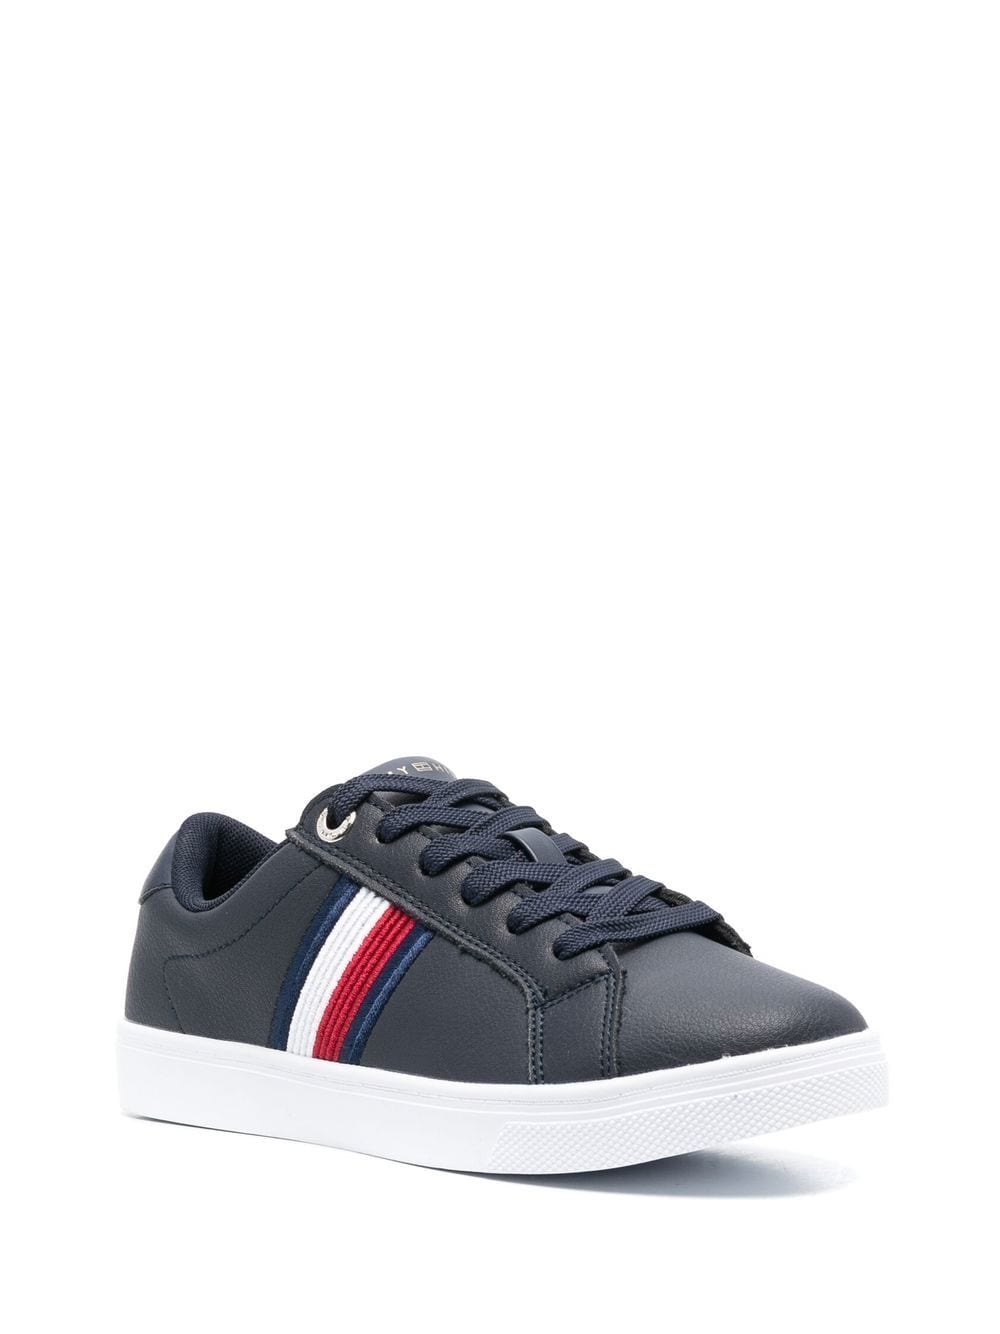 Tommy Hilfiger Essential Farfetch Stripes - lace-up Sneakers